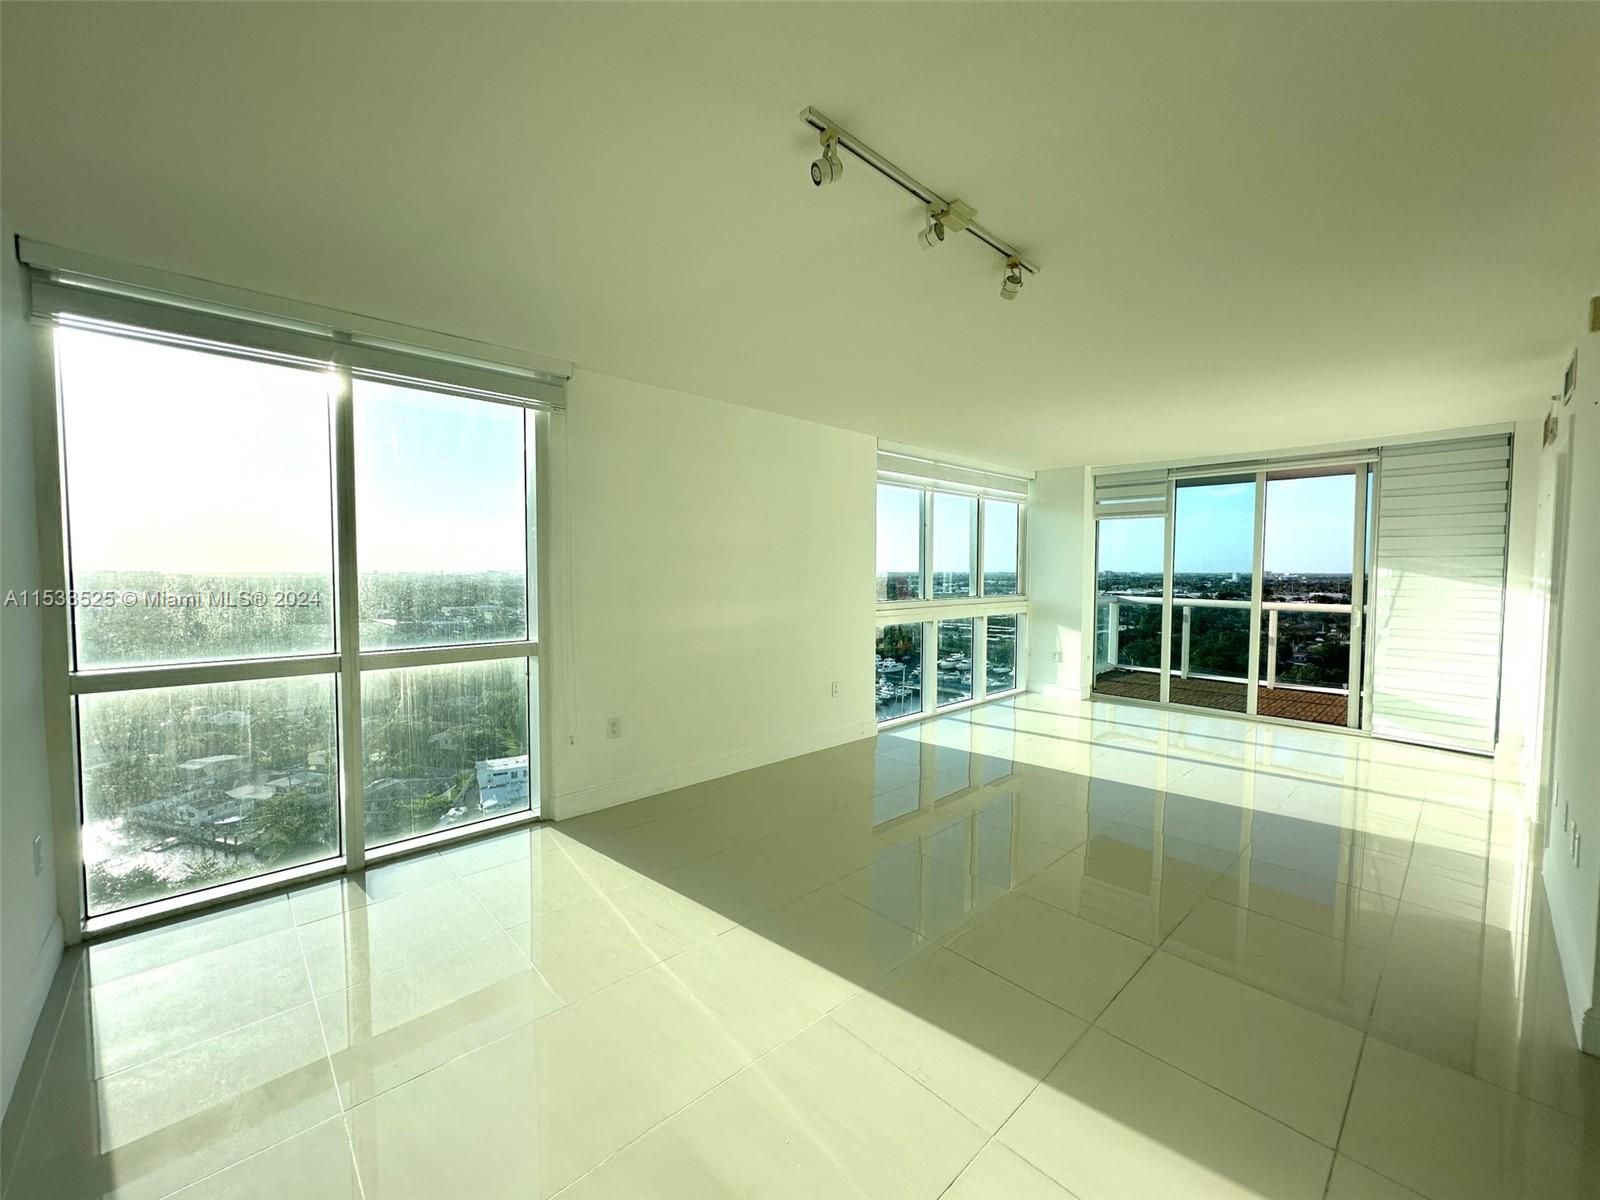 a view of an empty room with a floor to ceiling window and an outdoor view